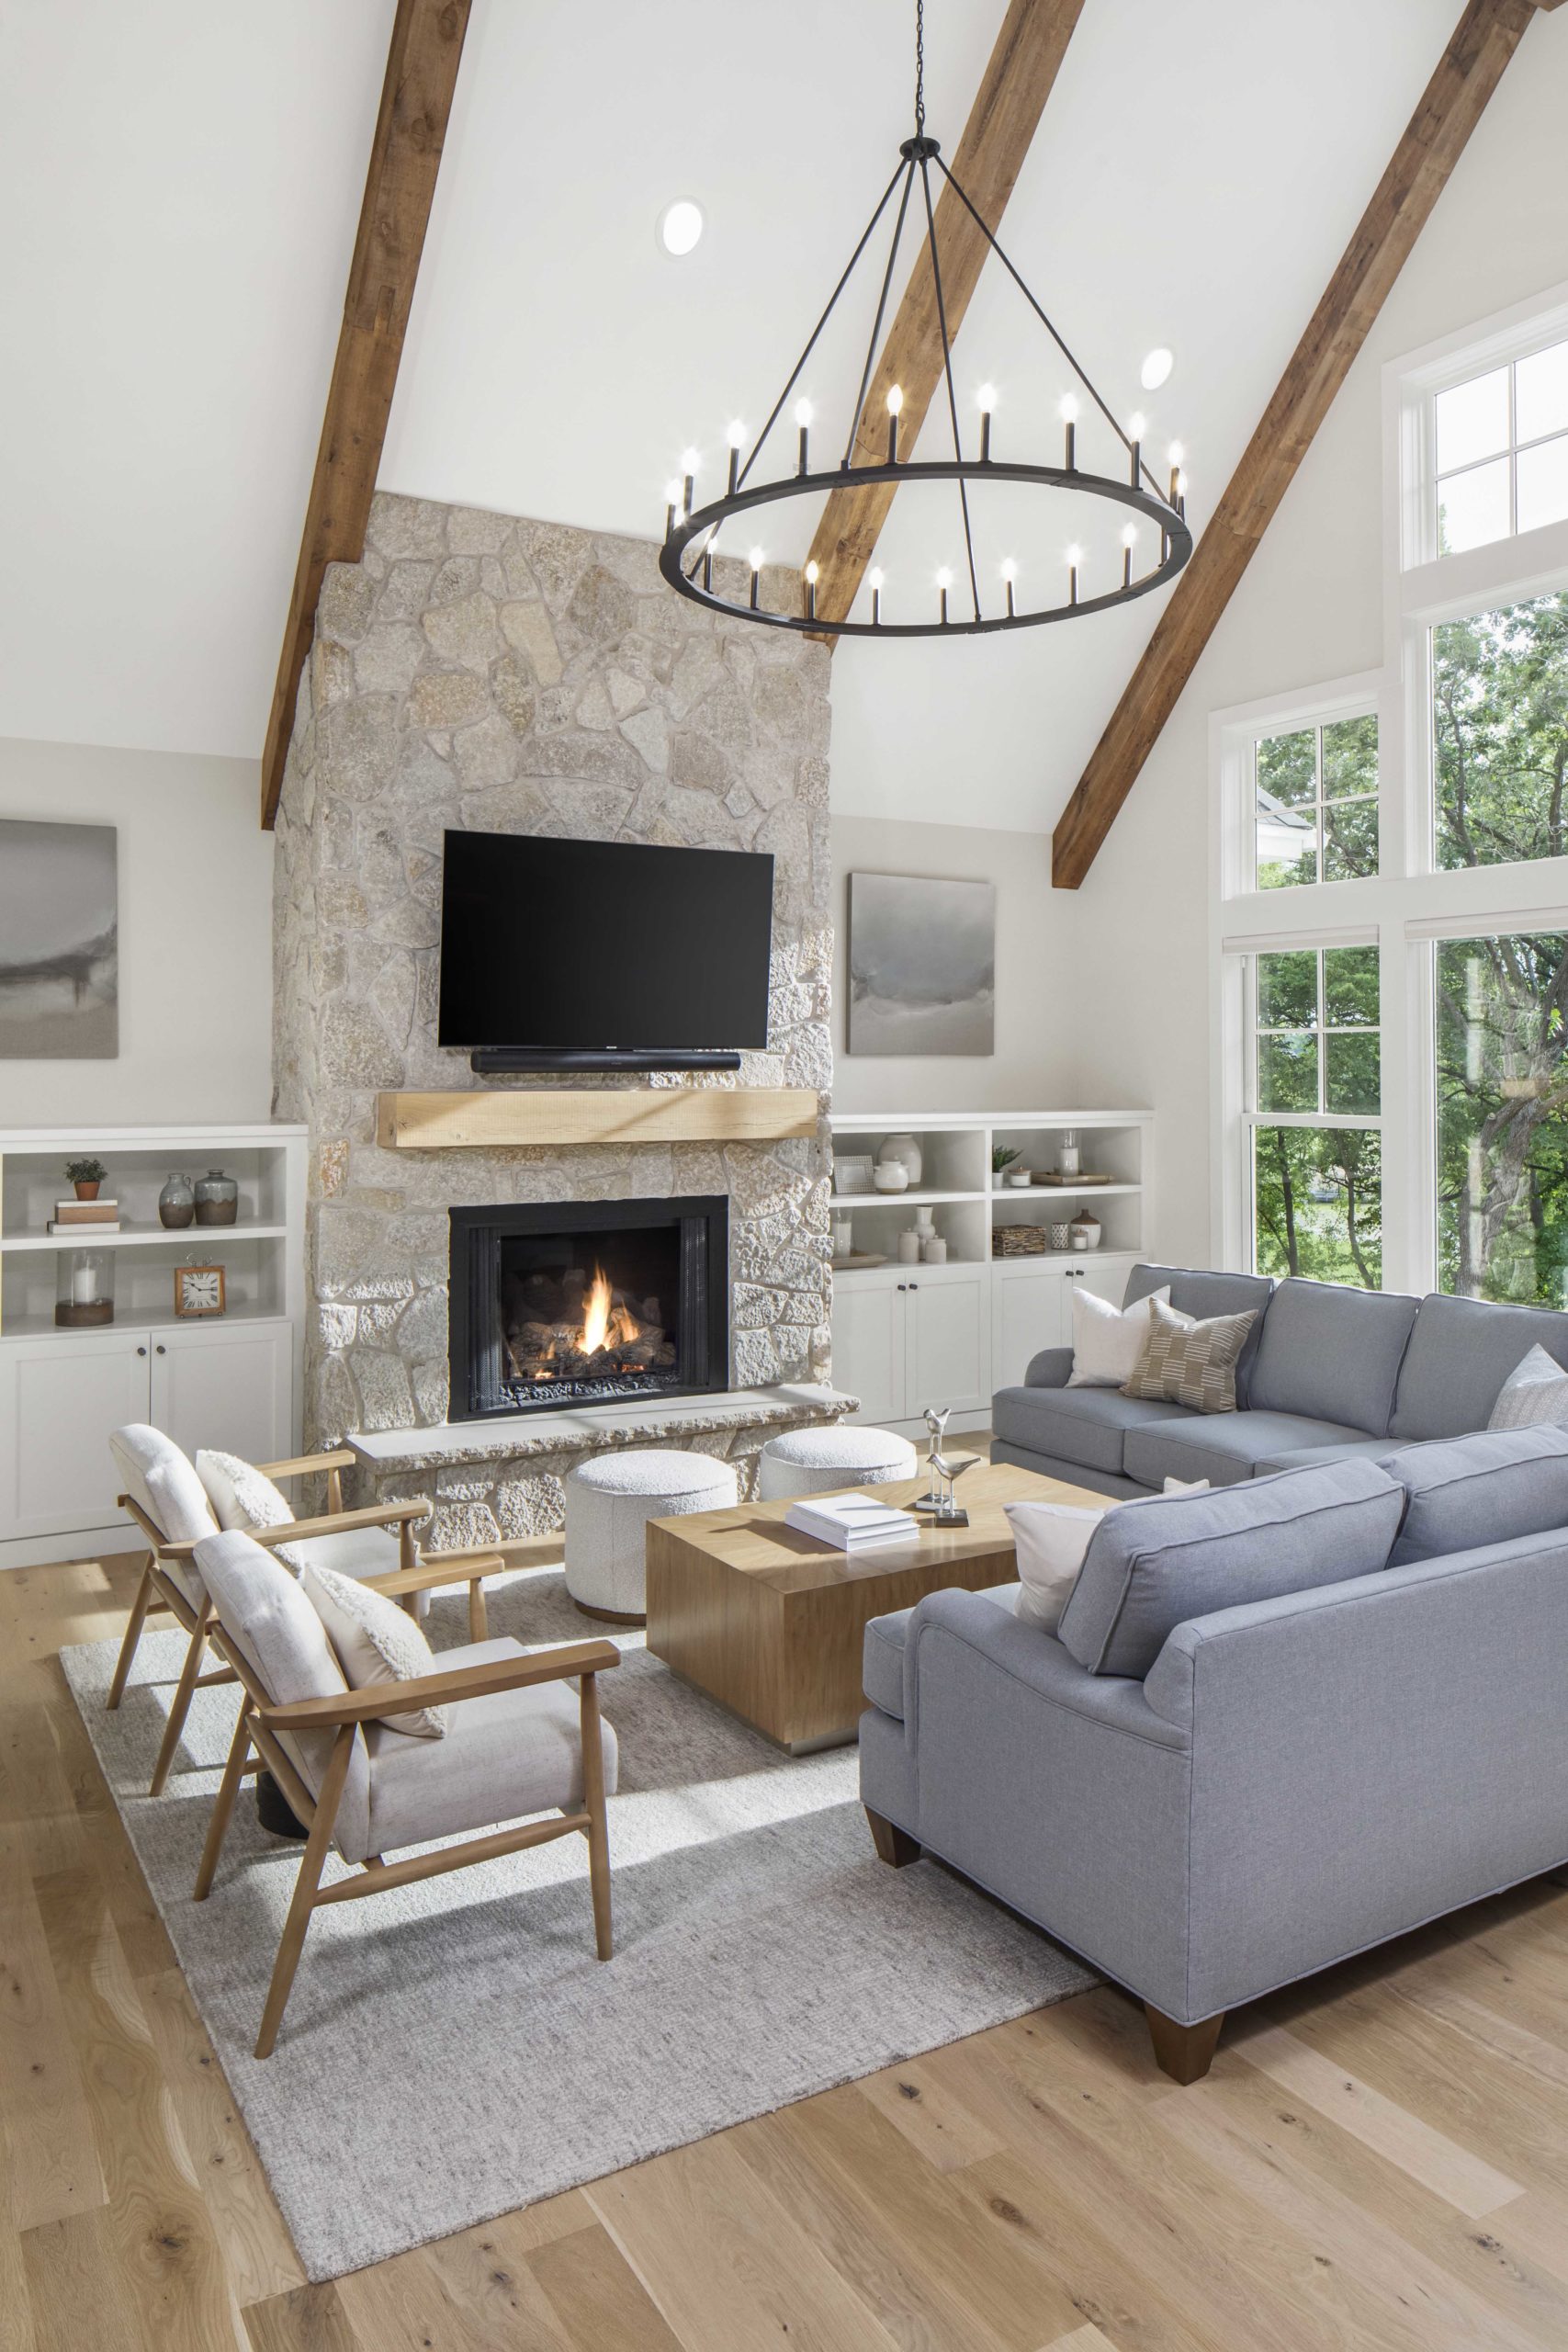 A custom lake home build featuring a large living room with wood beams and a fireplace.